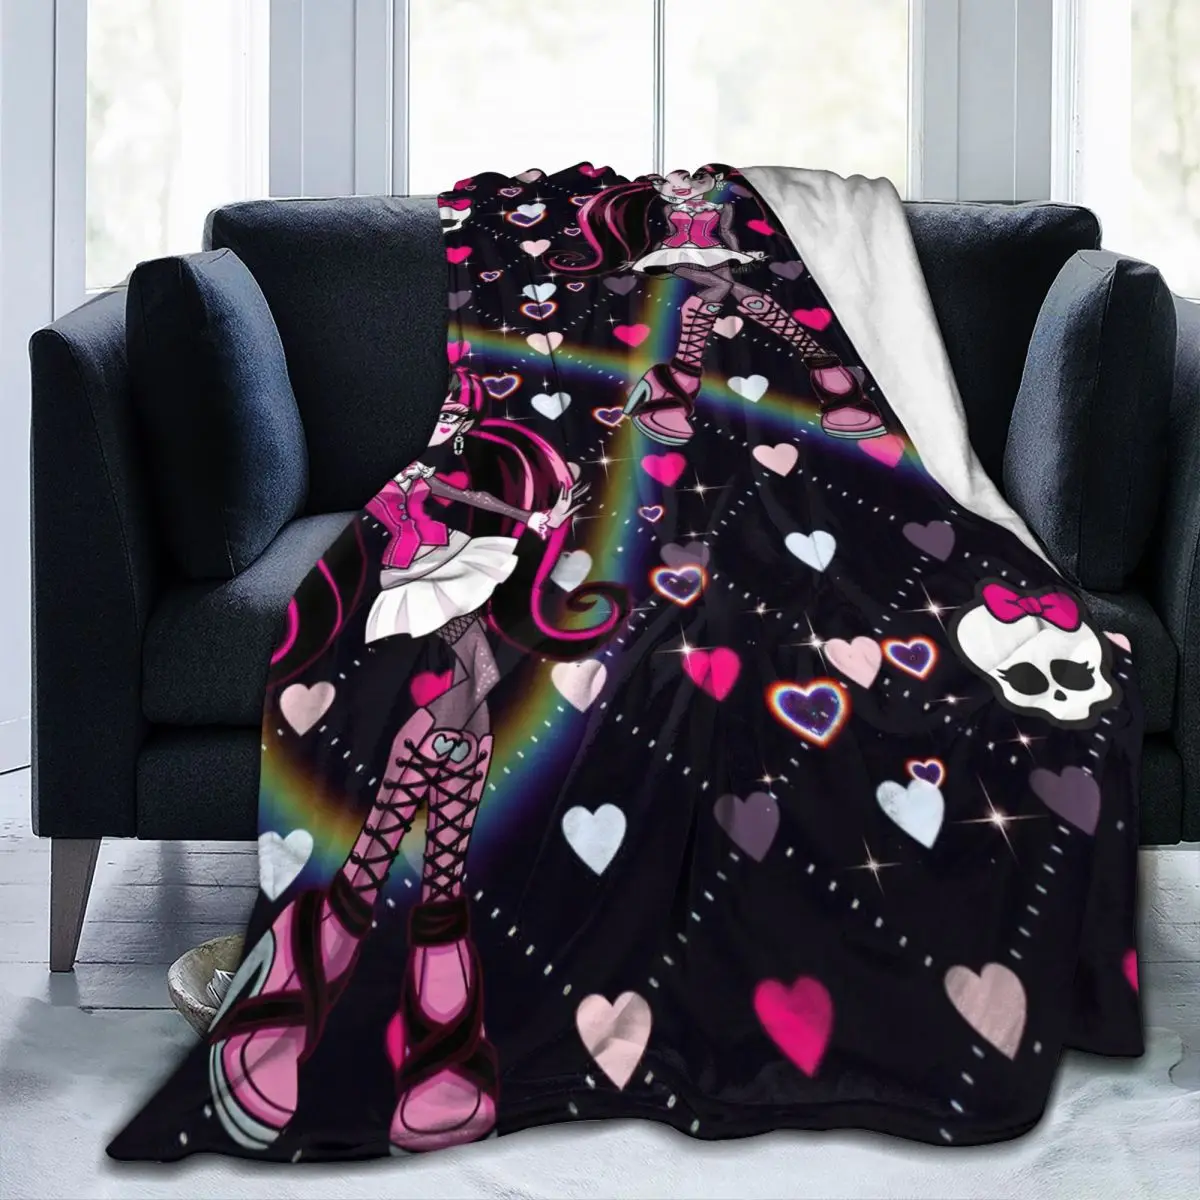 

Draculaura Monster High Anime Blanket Flannel All Season Breathable Ultra-Soft Throw Blankets for Home Travel Bedspread